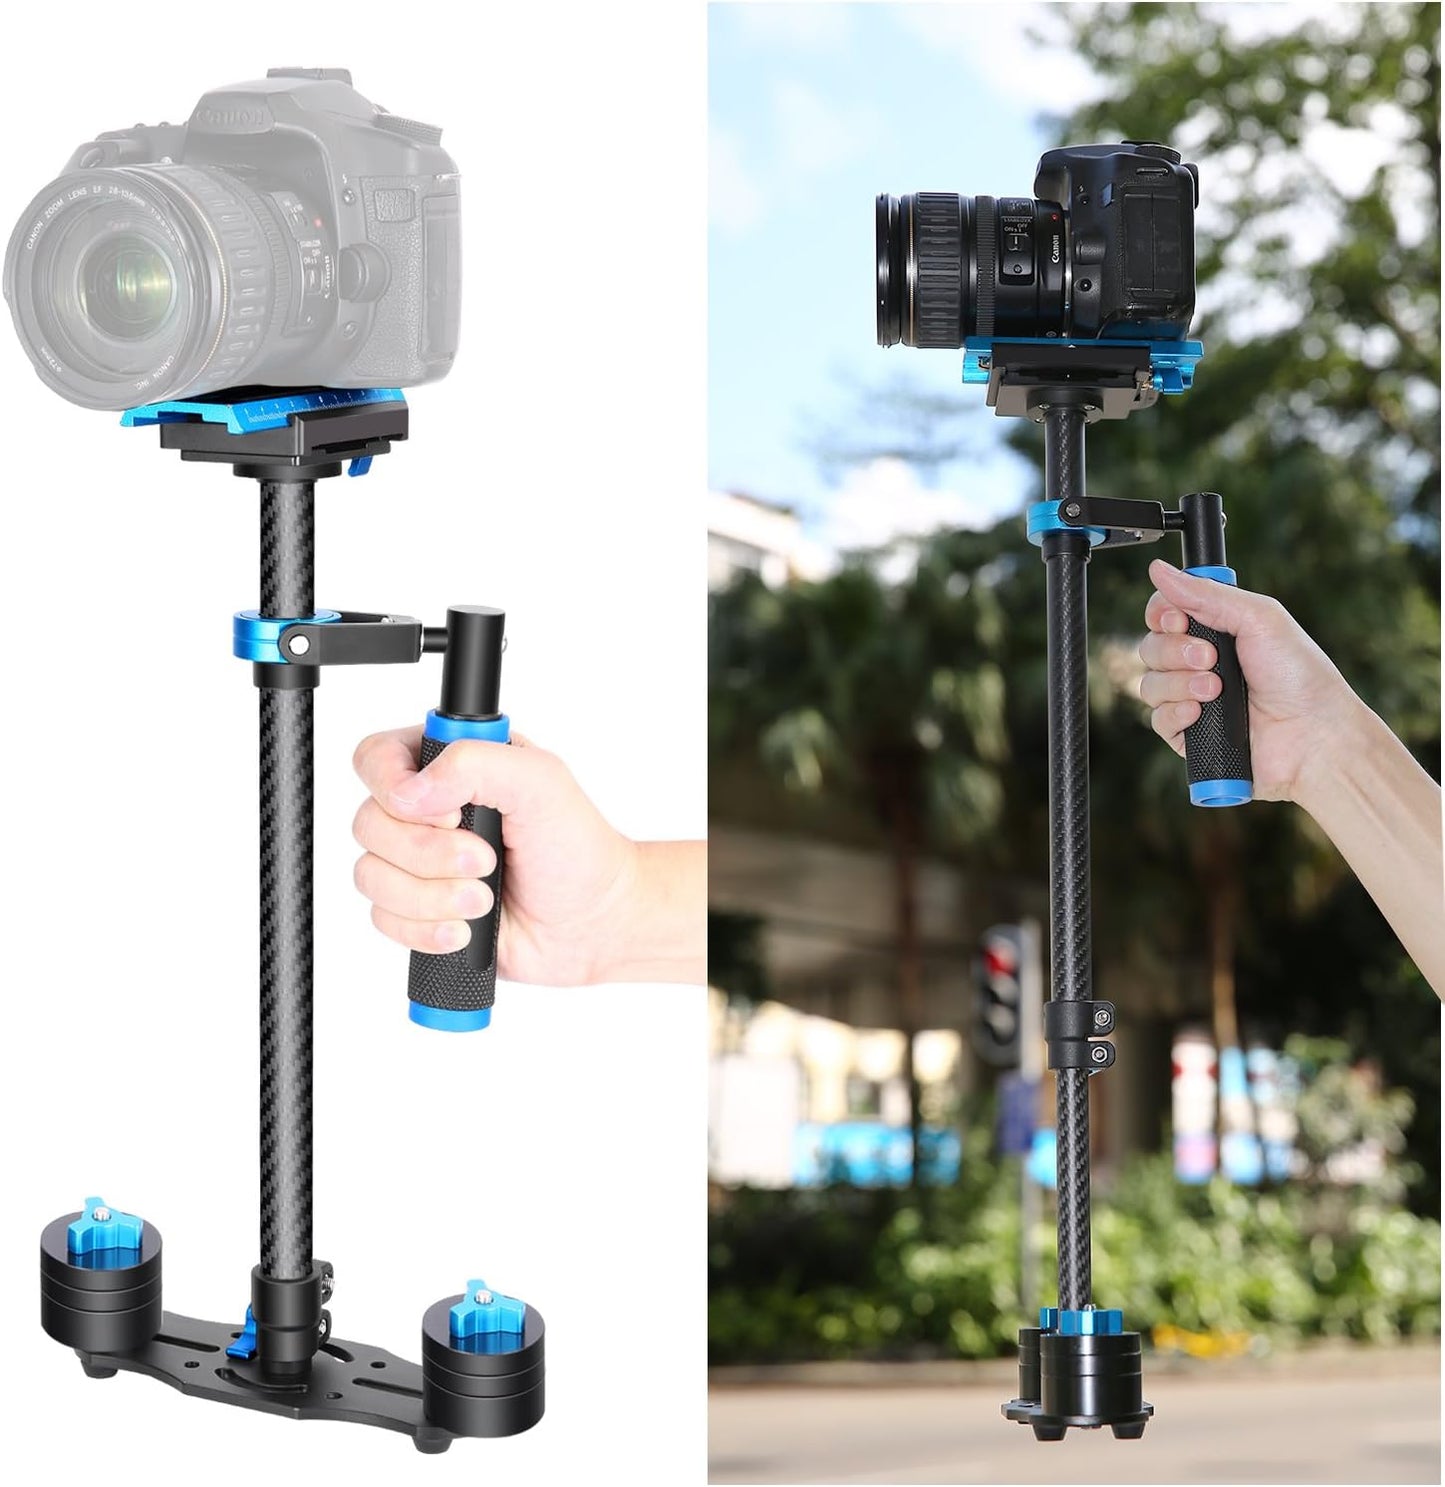 Neewer Carbon Fiber 24"/60cm Handheld Stabilizer with Quick Release Plate 1/4" and 3/8" Screw